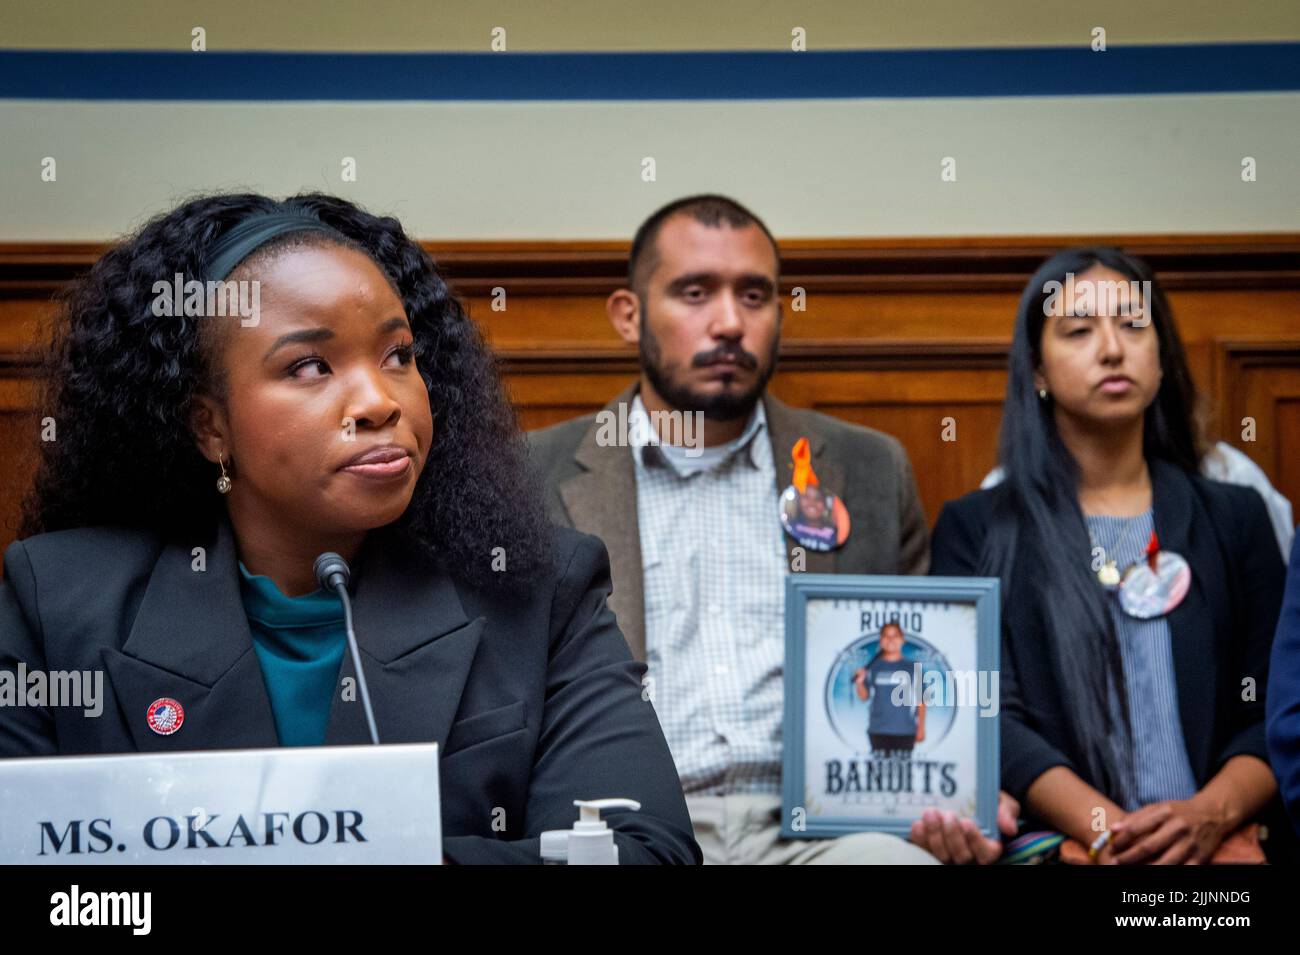 Felix Rubio, center, and Kimberly Rubio, right, whose daughter Alexandria Rubio was one of the children killed by a gunman at Robb Elementary School in Uvalde, Texas, listen to remarks by Antonia Okafor, National Director of Women's Outreach at Gun Owners of America, left, during a House Committee on Oversight and Reform hearing “Examining the Practices and Profits of Gun Manufacturers” in the Rayburn House Office Building in Washington, DC, July 27, 2022. Credit: Rod Lamkey/CNP /MediaPunch Stock Photo